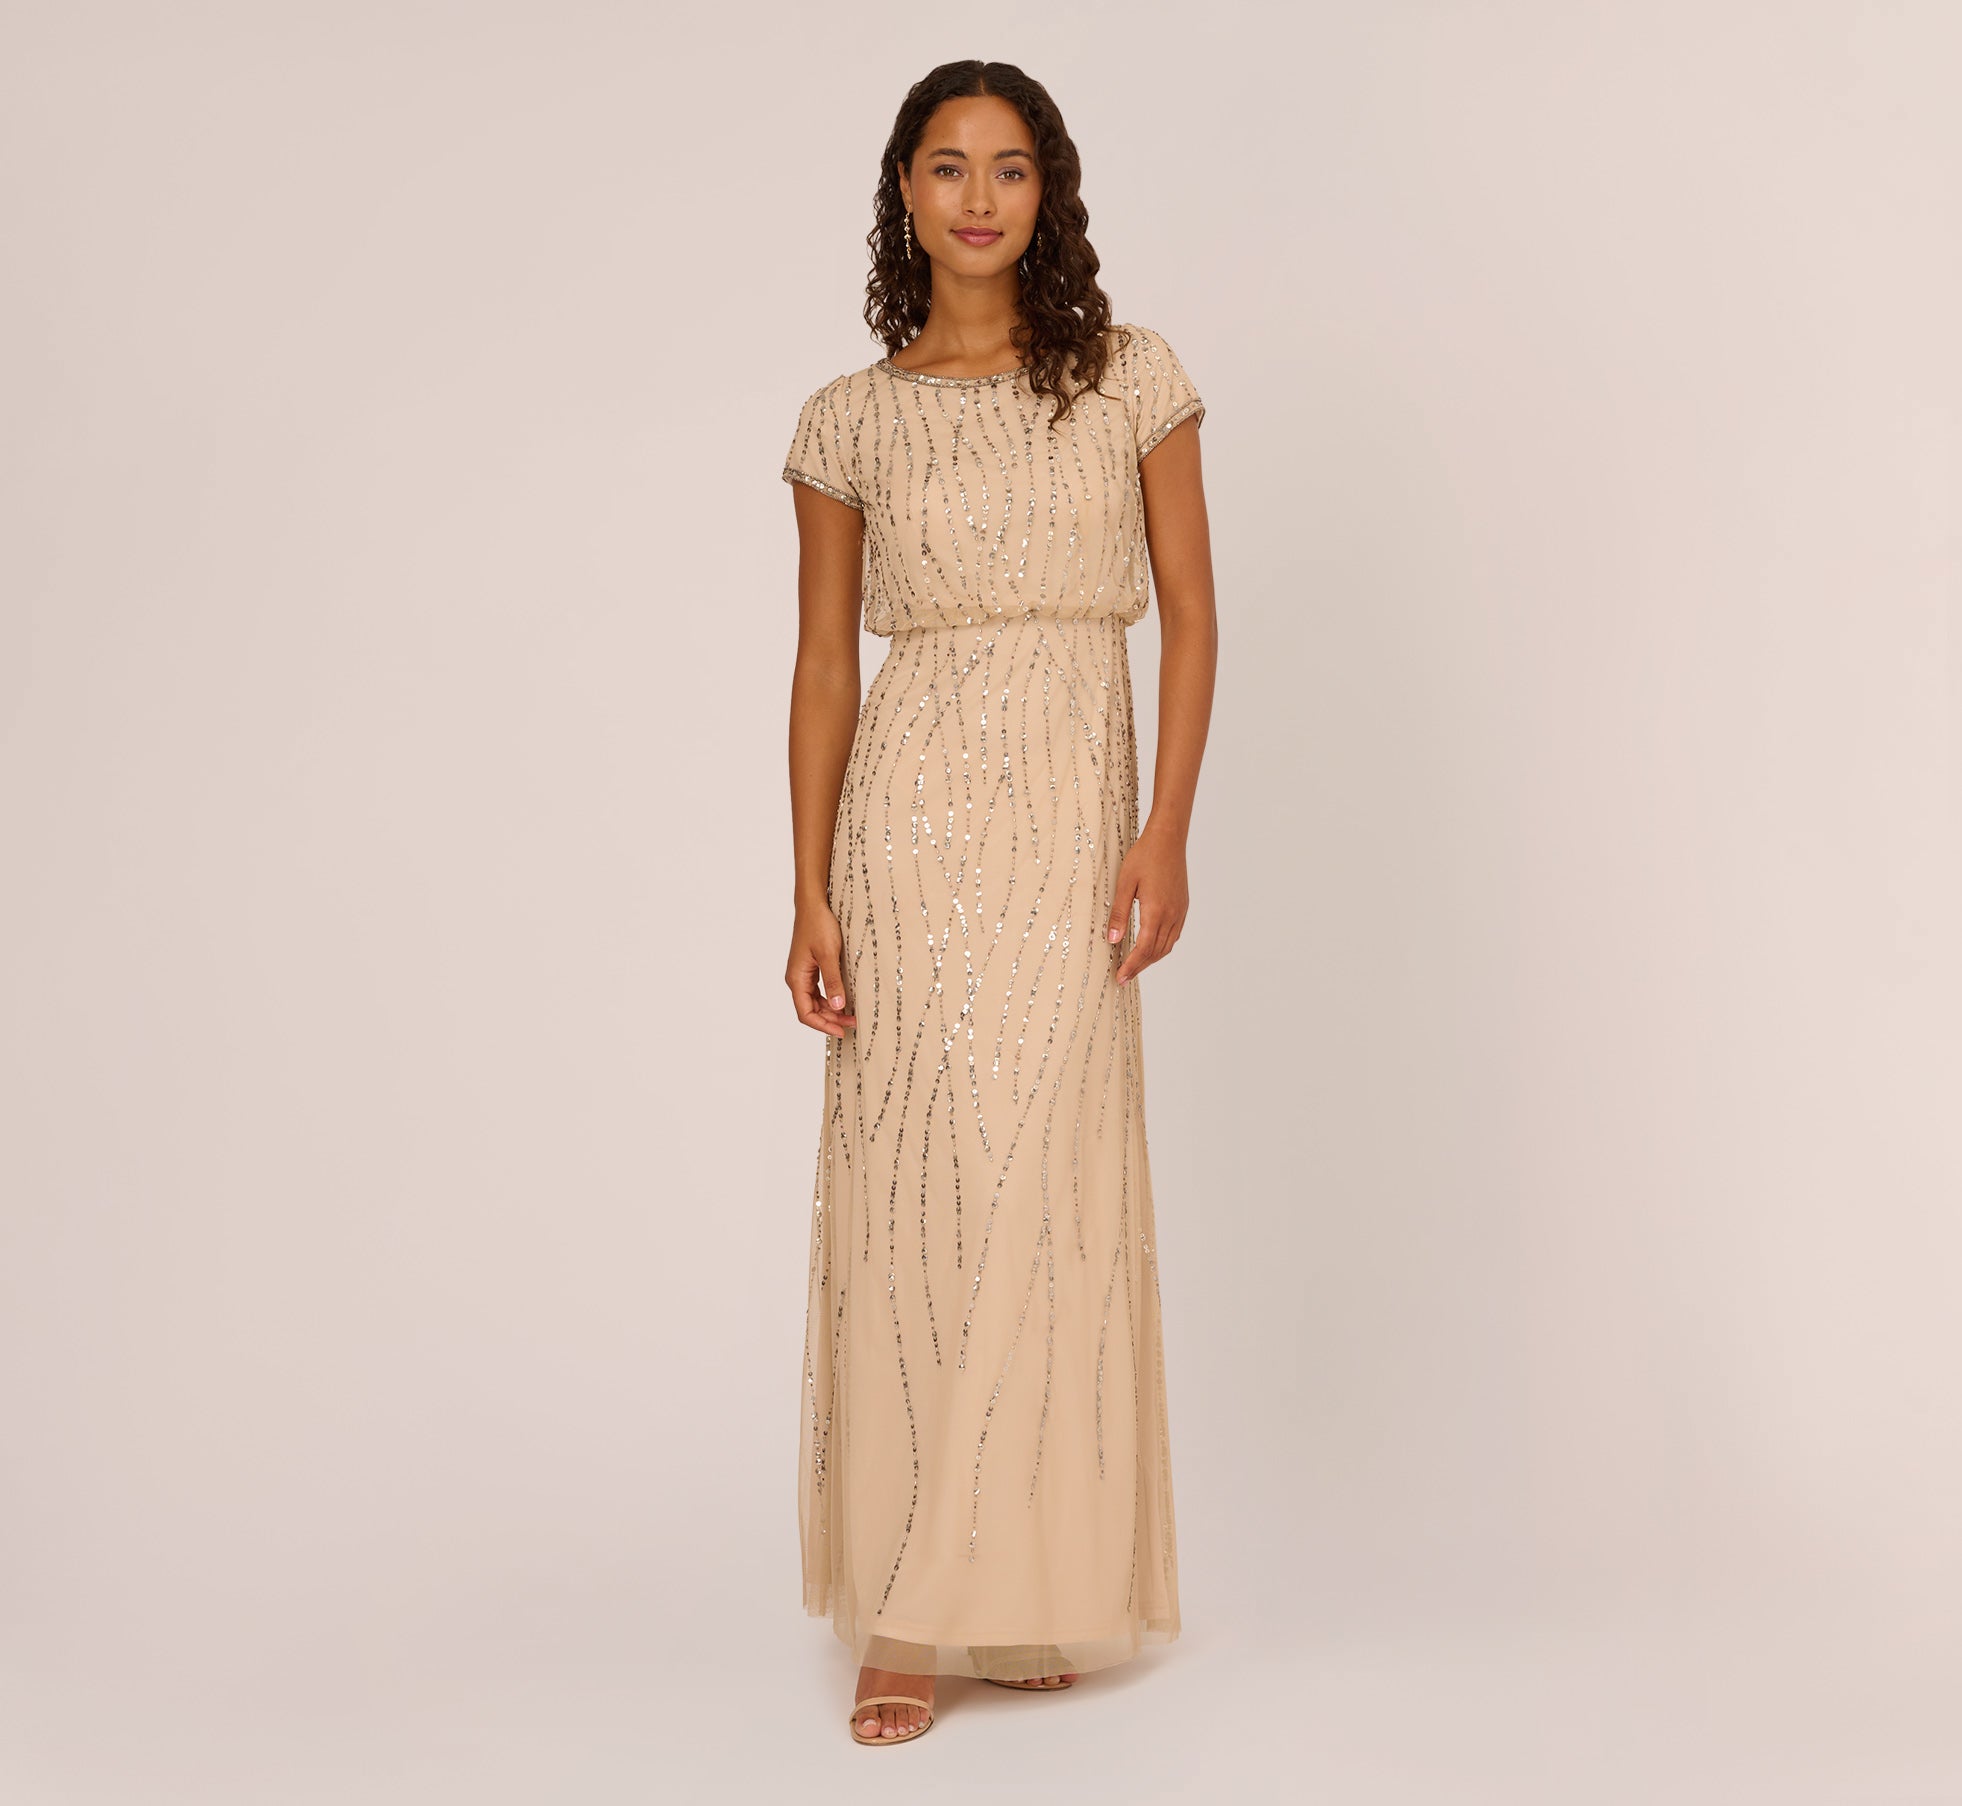 Kirsten Hand Beaded Blouson Gown by Adrianna Papell - Blush - Mothers Only